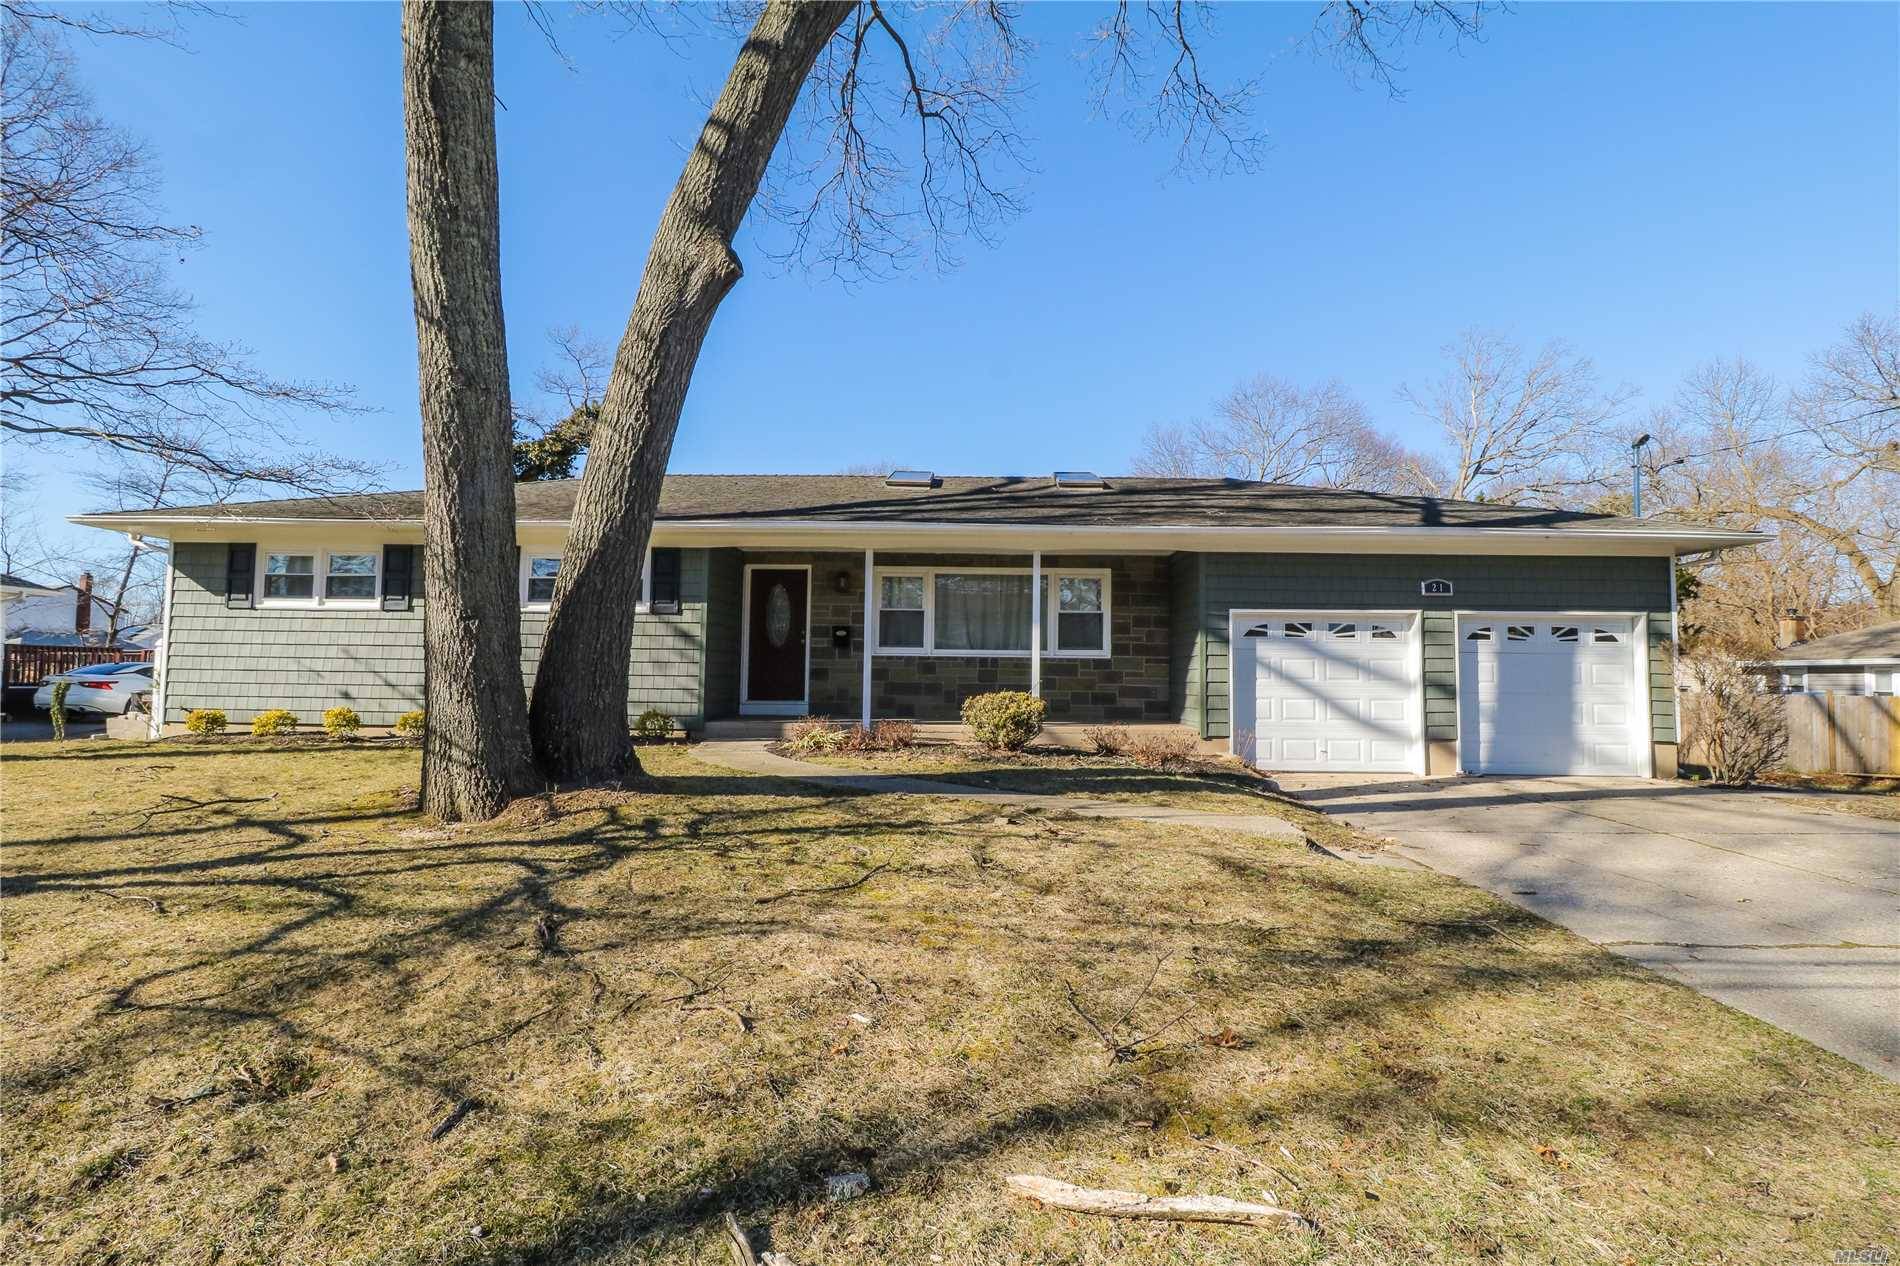 Beautiful Ranch Style Home, All updated with New Kitchen, Bath, Roof, CAC.